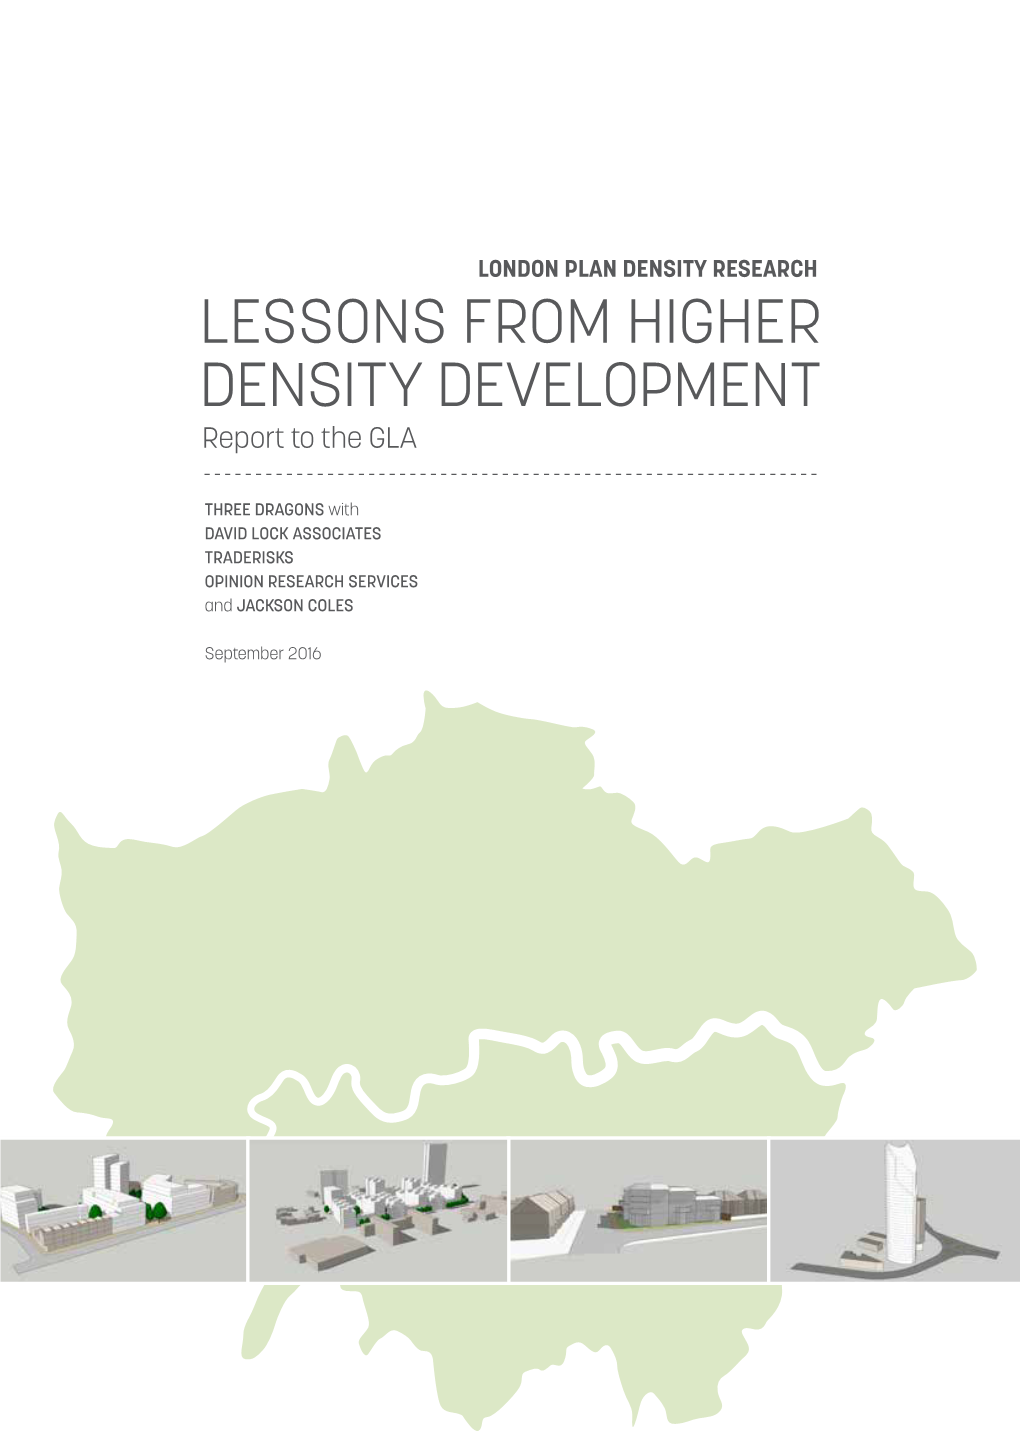 LESSONS from HIGHER DENSITY DEVELOPMENT Report to the GLA